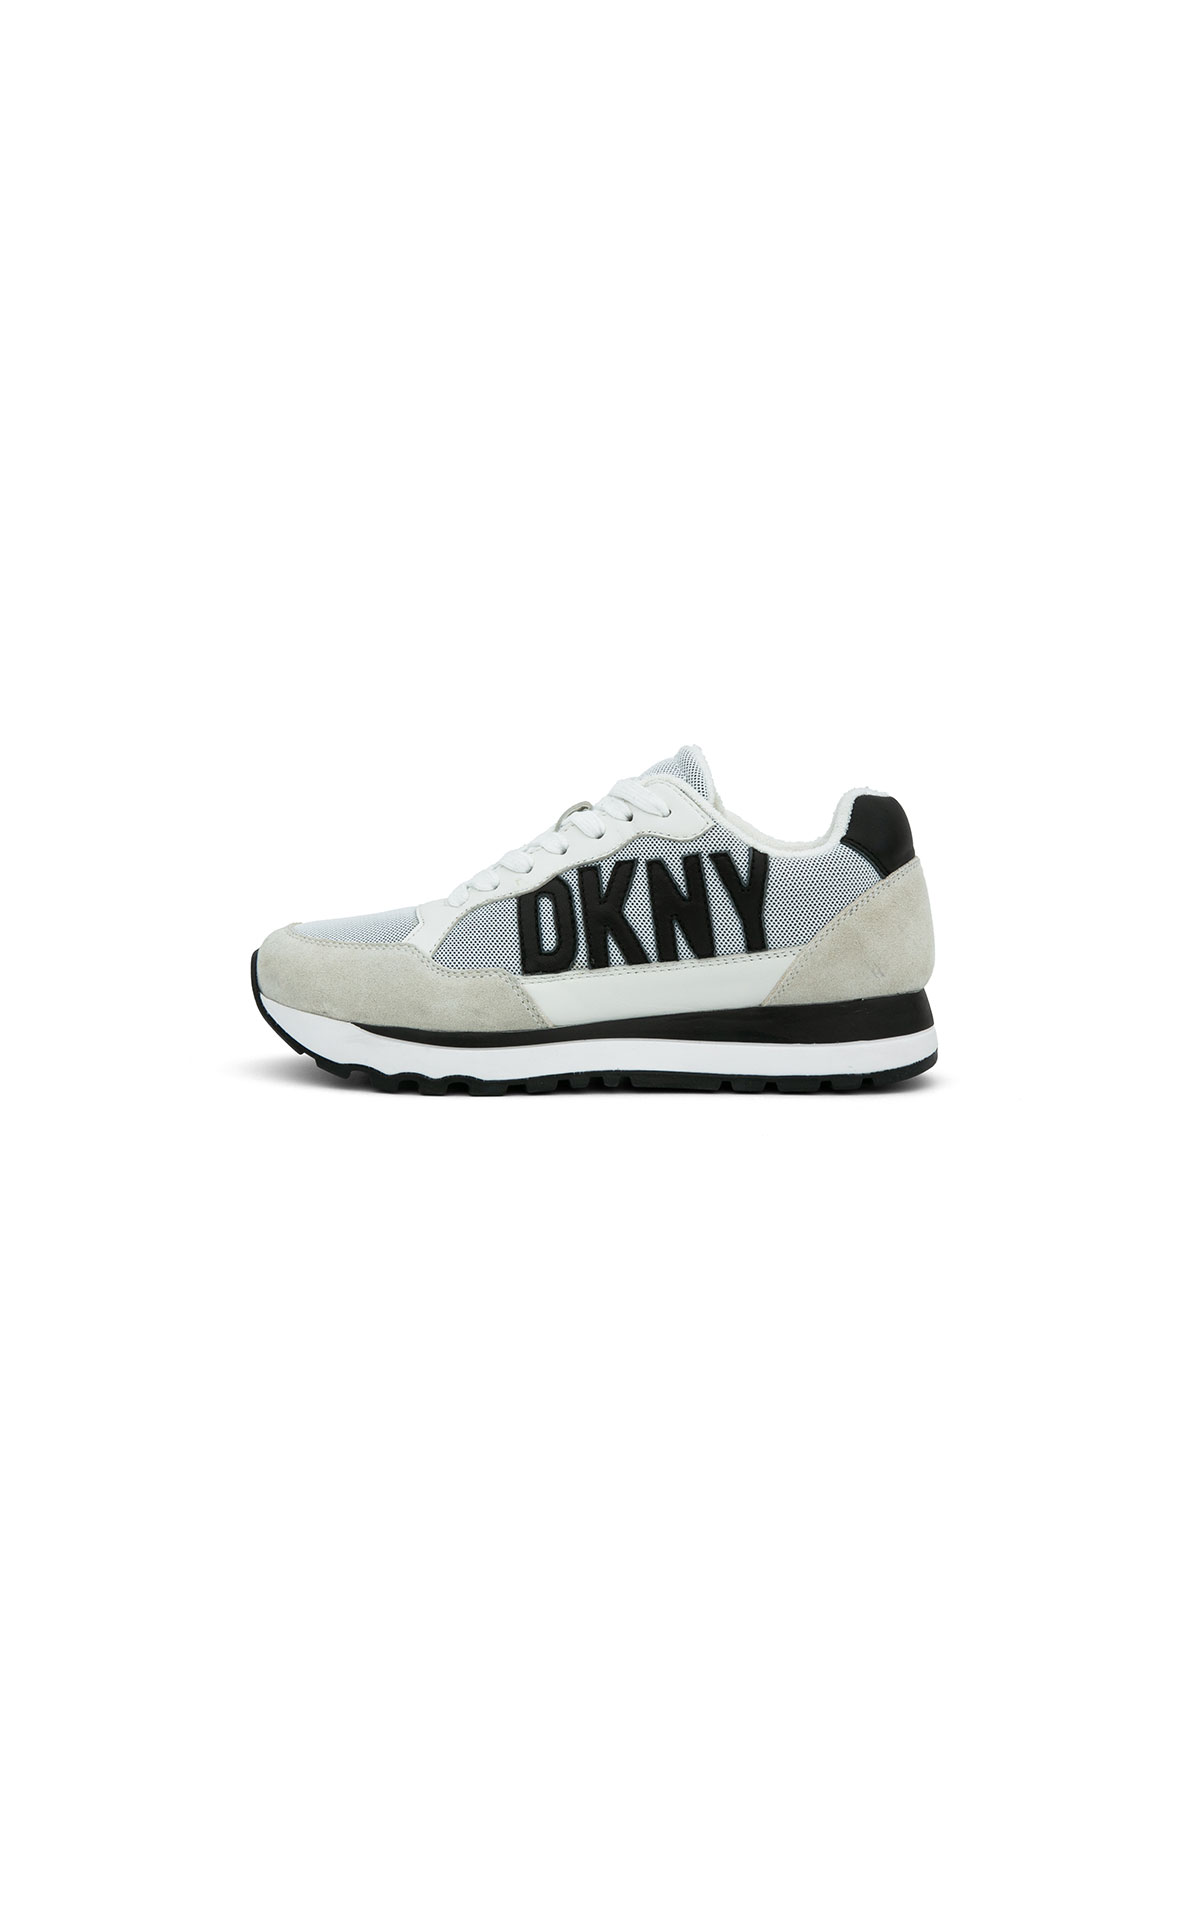 DKNY Exploded logo retro sneaker from Bicester Village